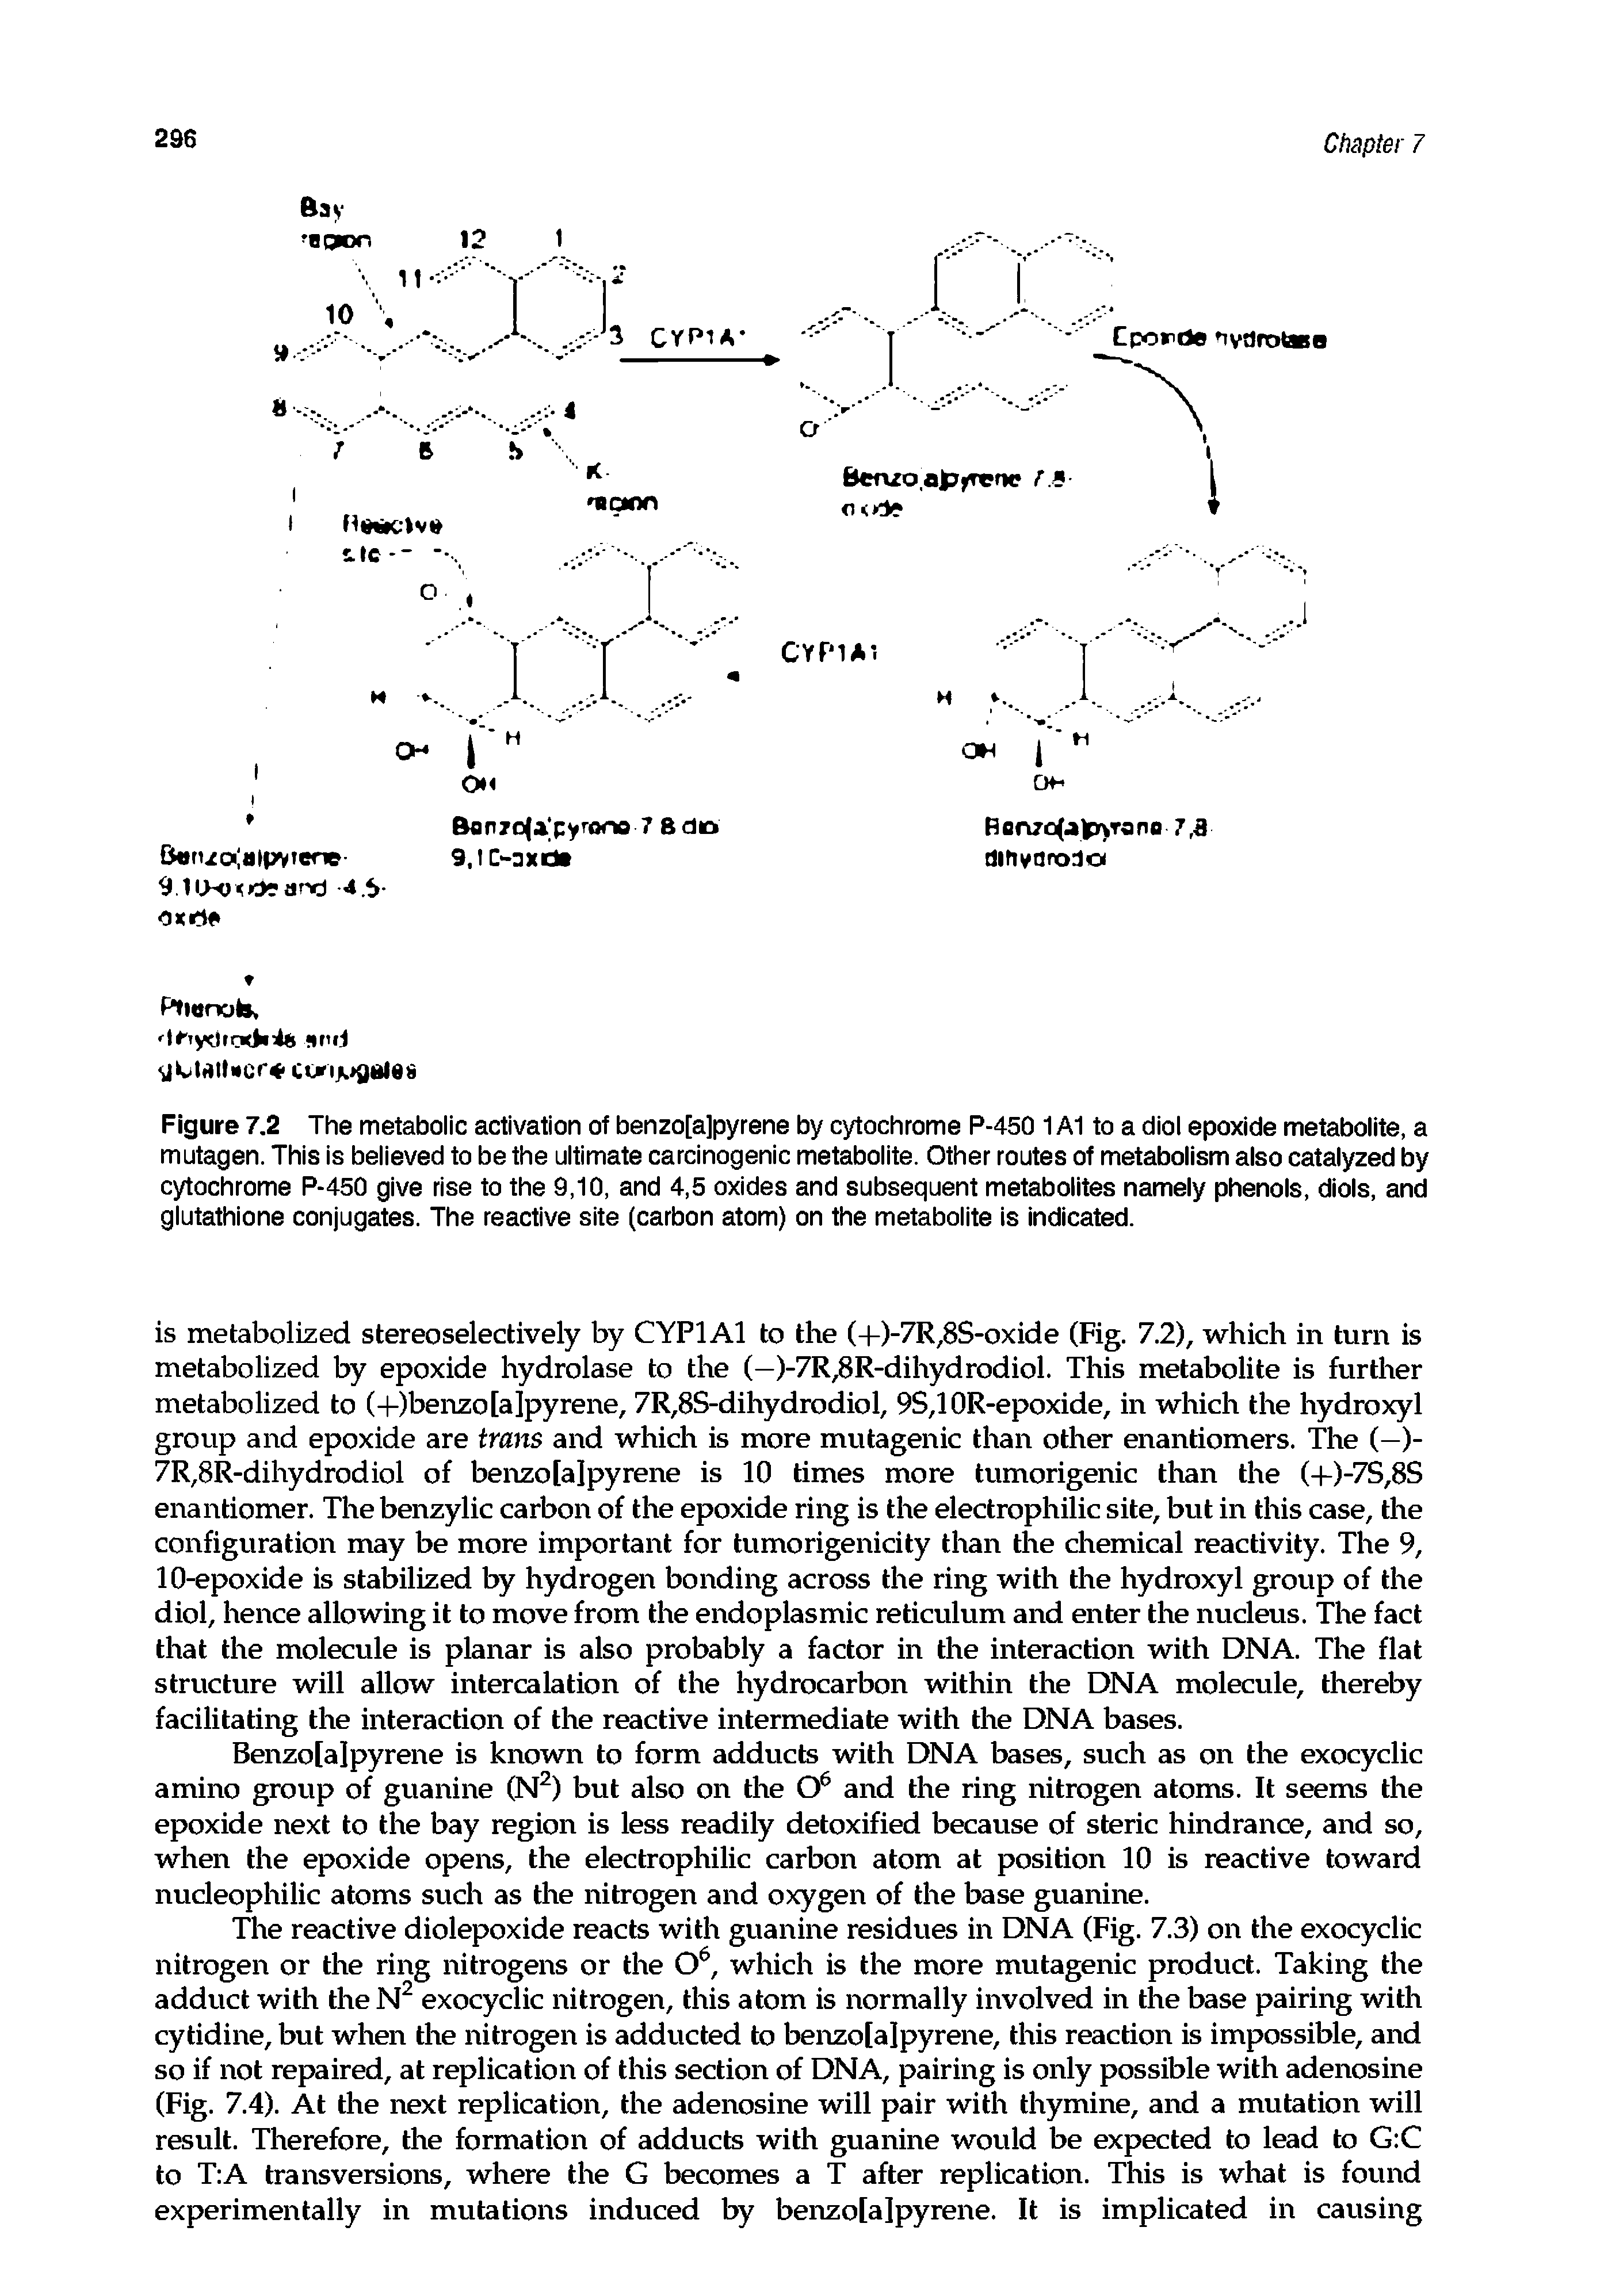 Figure 7.2 The metabolic activation of benzo[a]pyrene by cytochrome P-450 1A1 to a diol epoxide metabolite, a mutagen. This is believed to be the ultimate carcinogenic metabolite. Other routes of metabolism also catalyzed by cytochrome P-450 give rise to the 9,10, and 4,5 oxides and subsequent metabolites namely phenols, diols, and glutathione conjugates. The reactive site (carbon atom) on the metabolite is indicated.